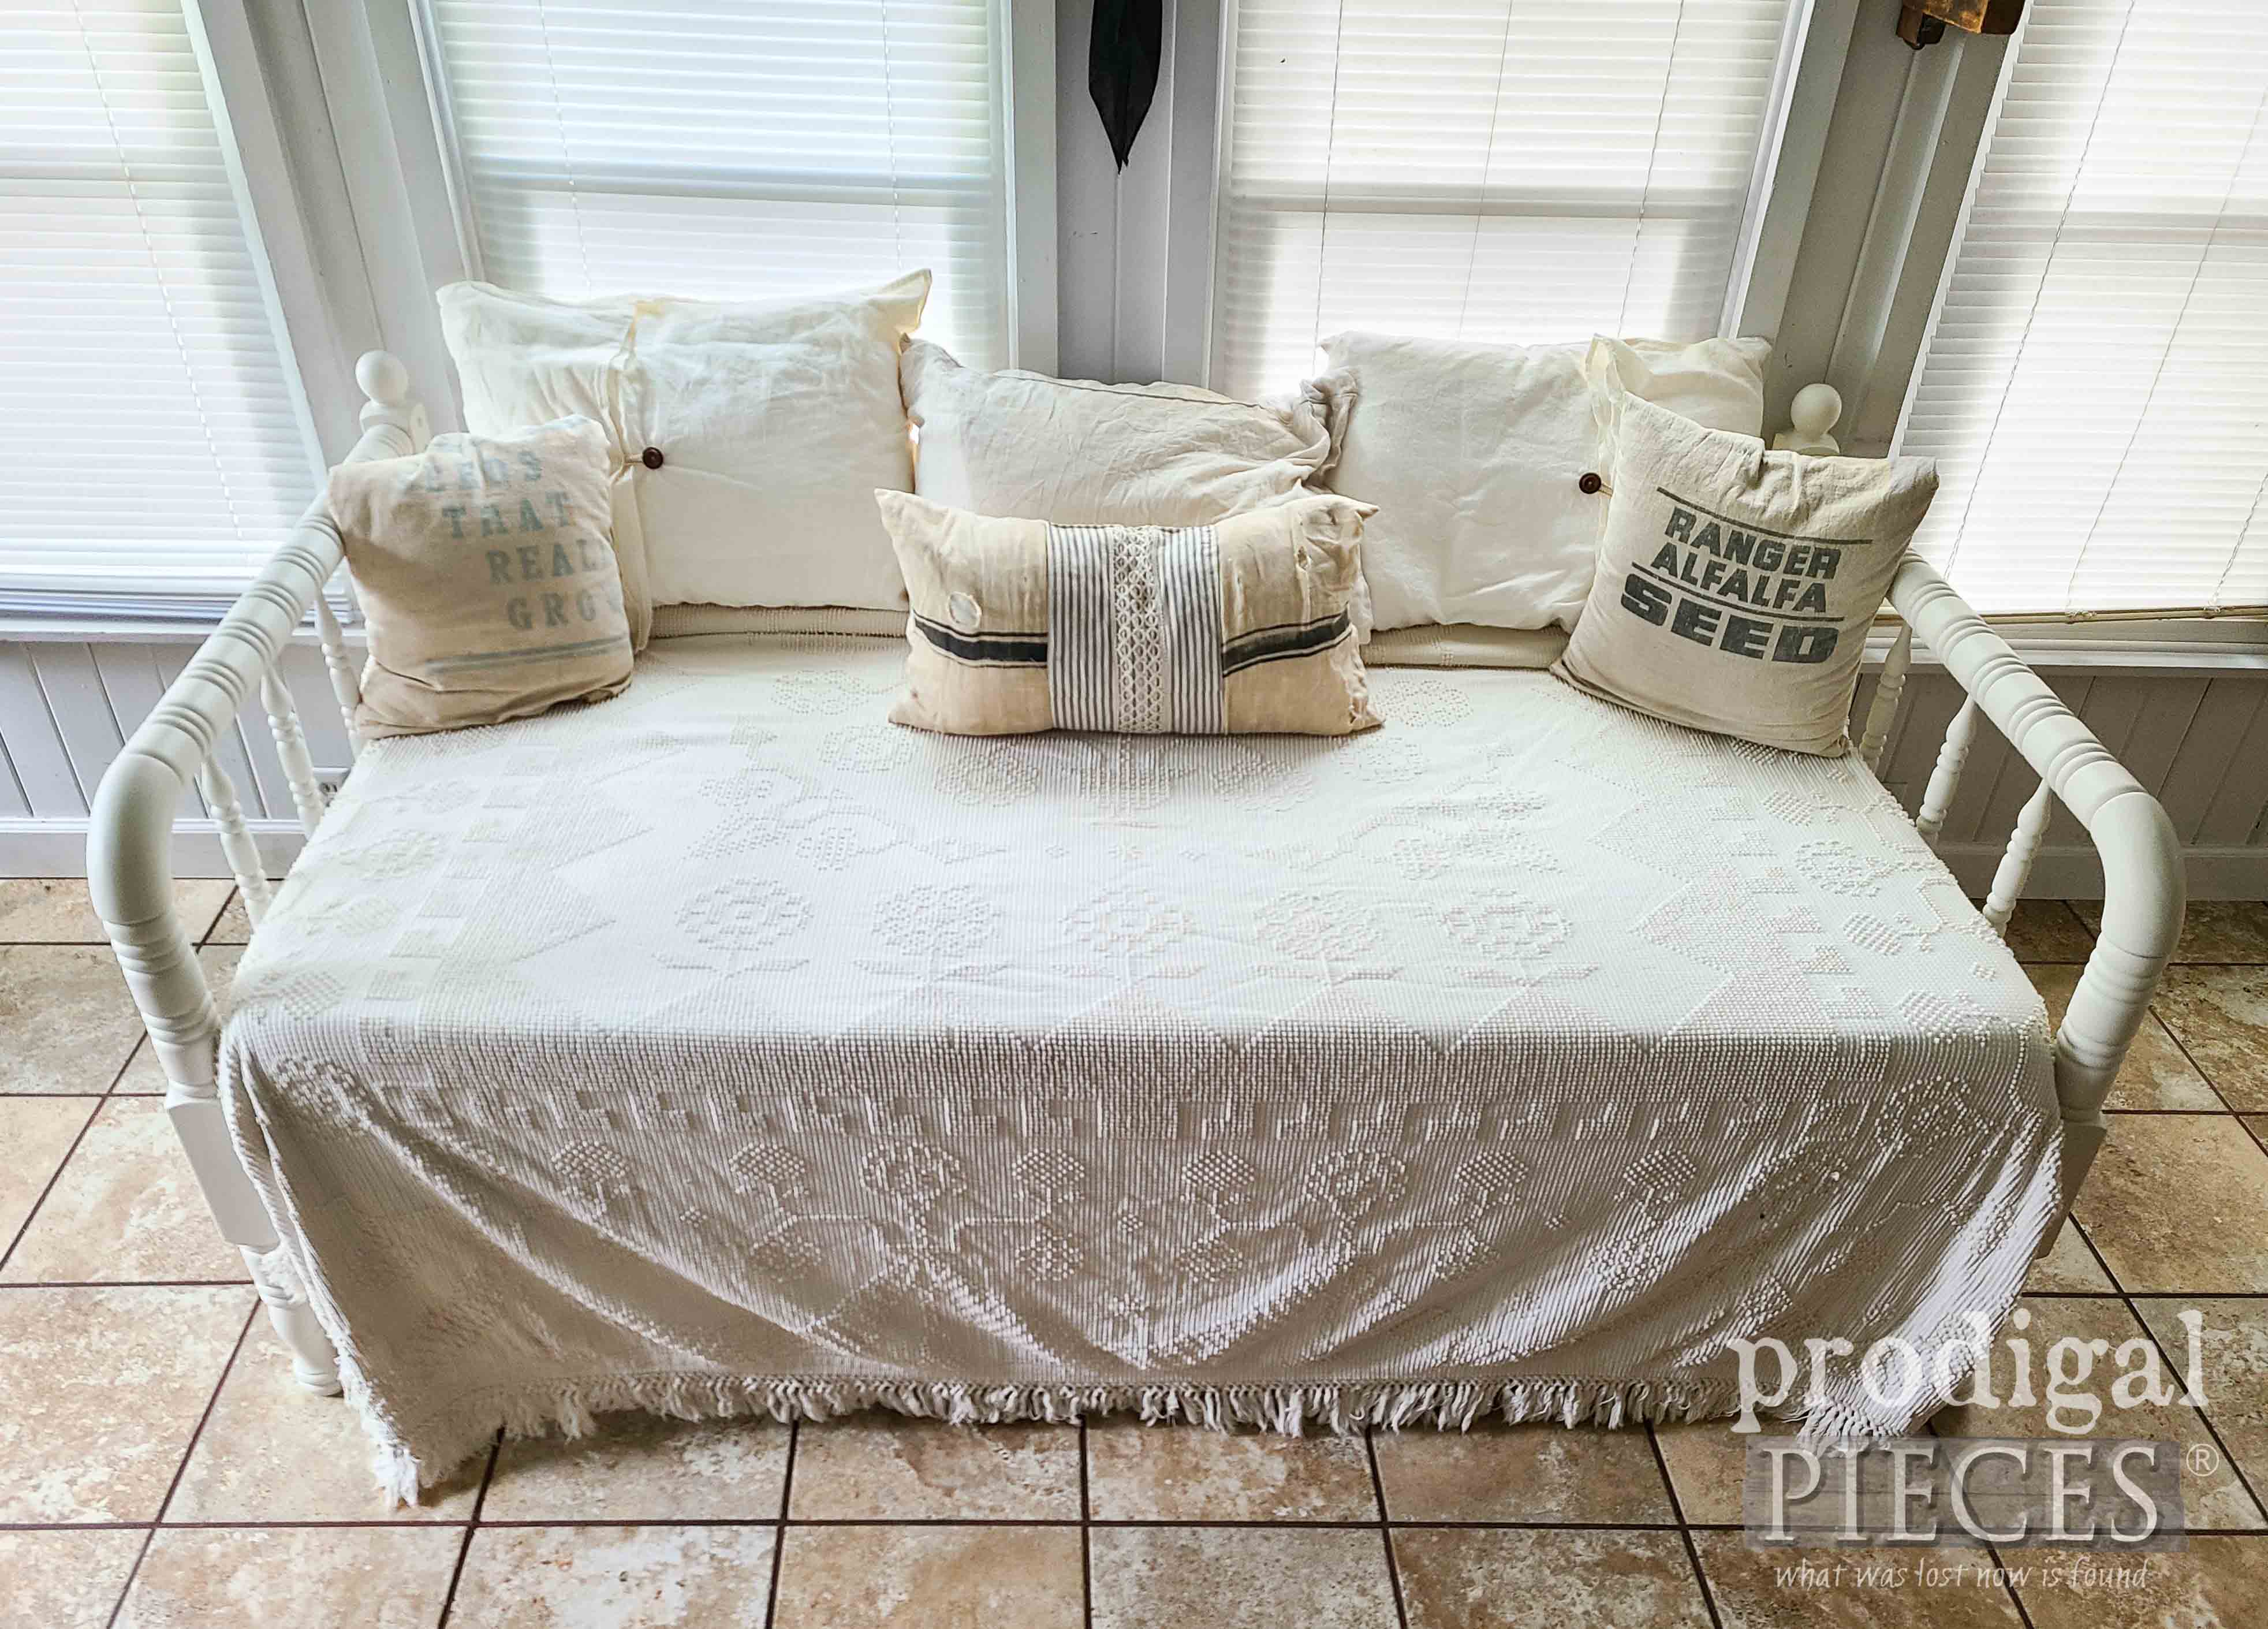 Top View of Farmhouse Daybed from Upcycled Bed Frame by Larissa of Prodigal Pieces | prodigalpieces.com #prodigalpieces #bedroom #diy #upcycled